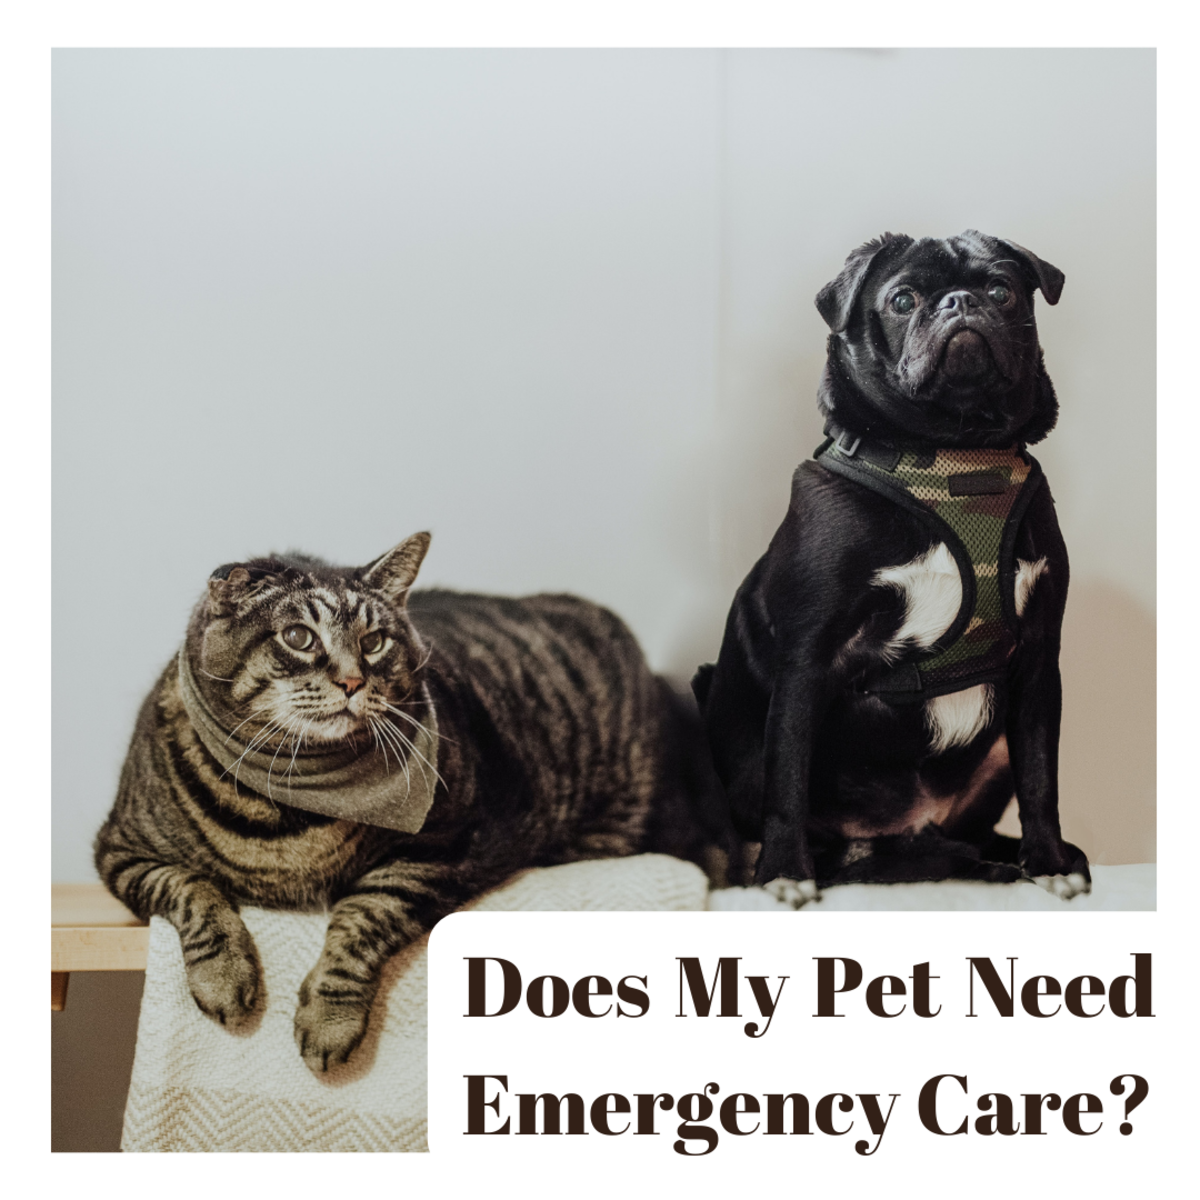 Understanding what is a true emergency will help you determine when to seek immediate care for your pet.